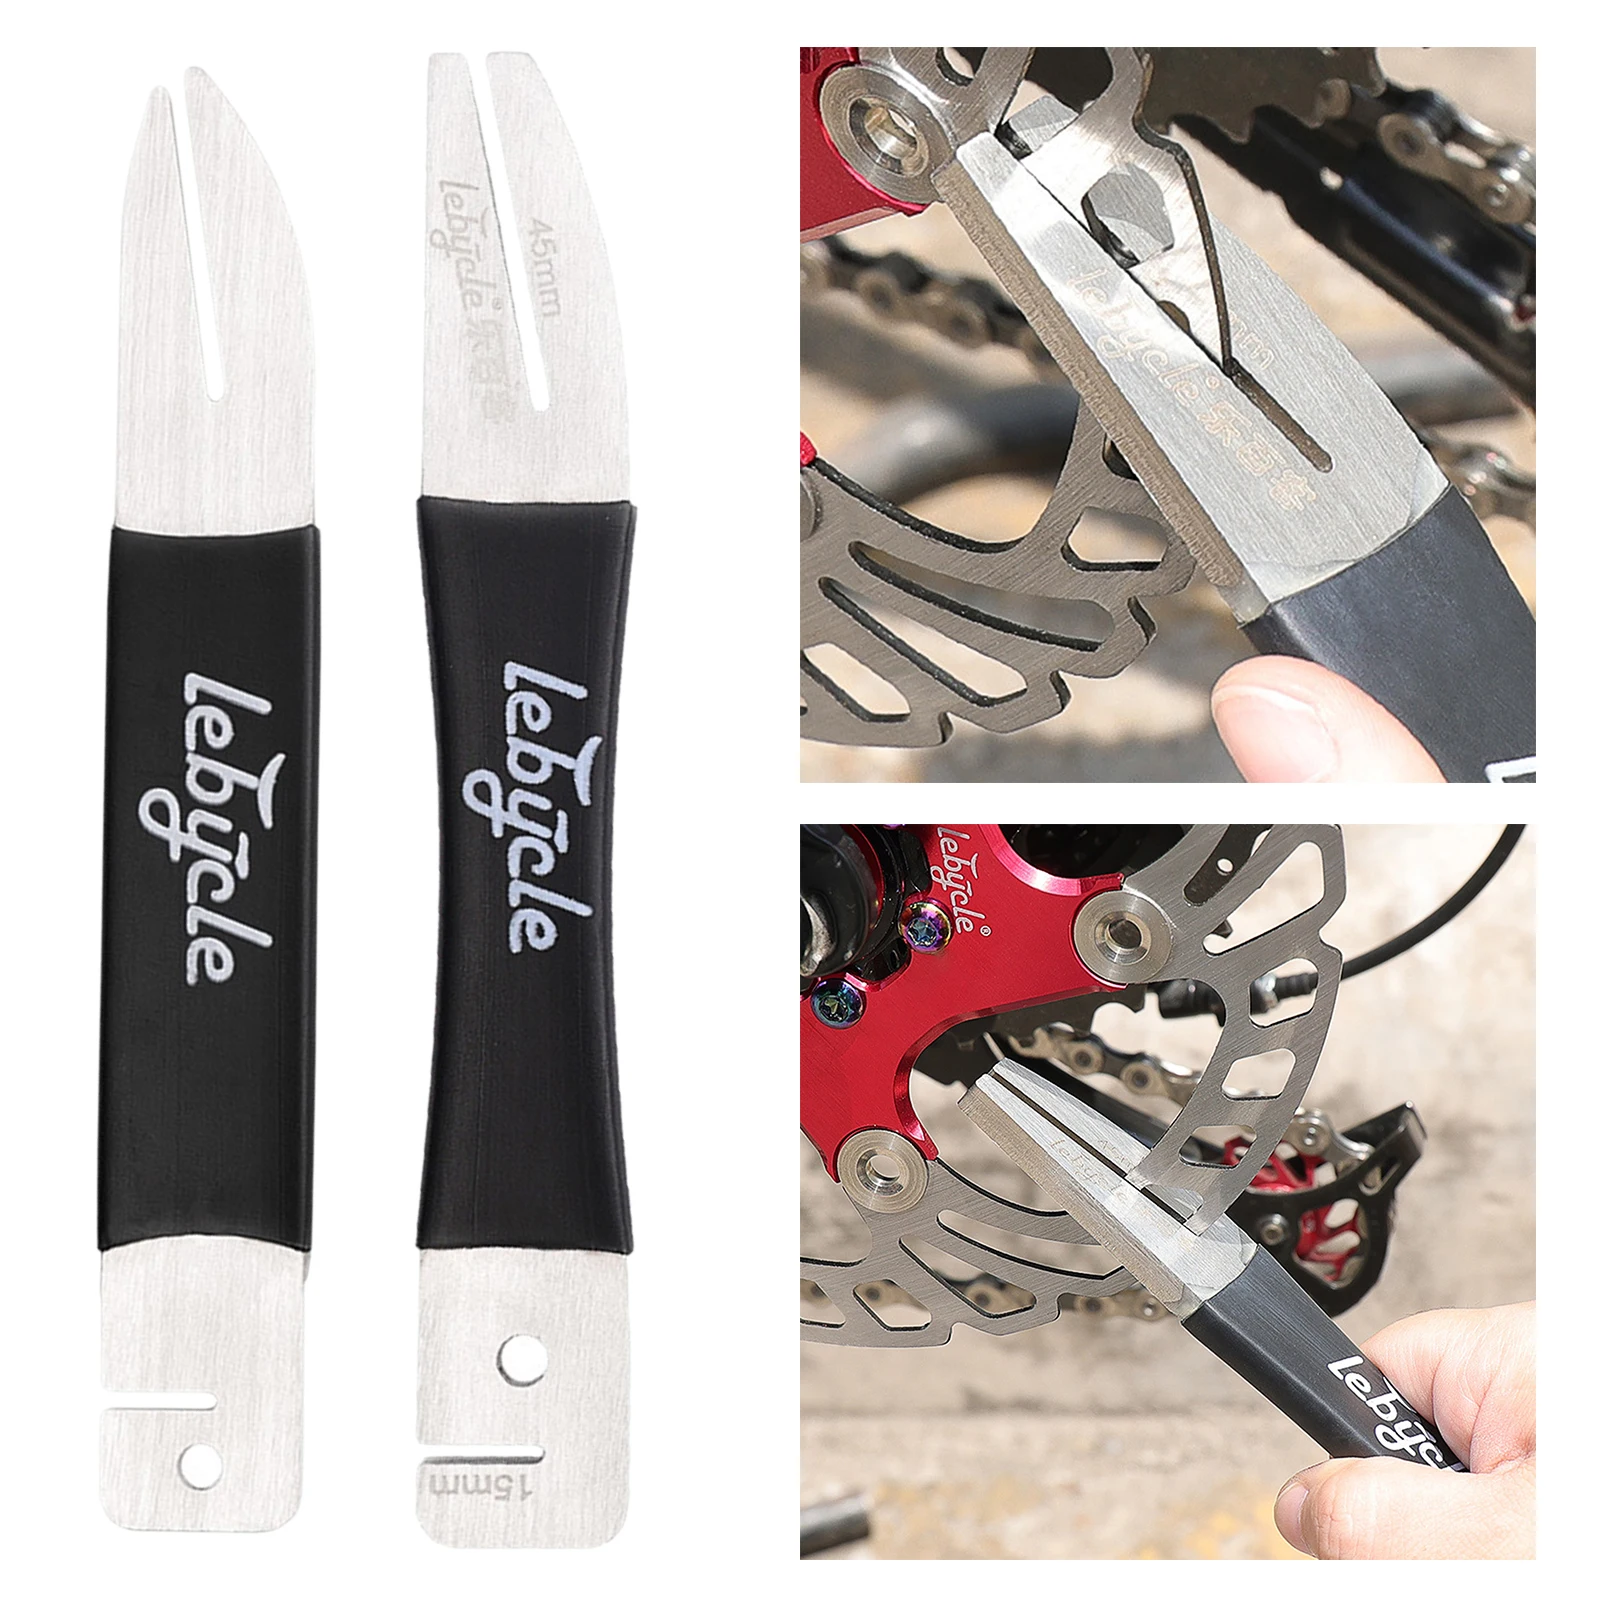 Bike Rotor Caliper Disc Brake Tool Flattening Correction Wrench for All Bicycle - 15mm / 45mm Size